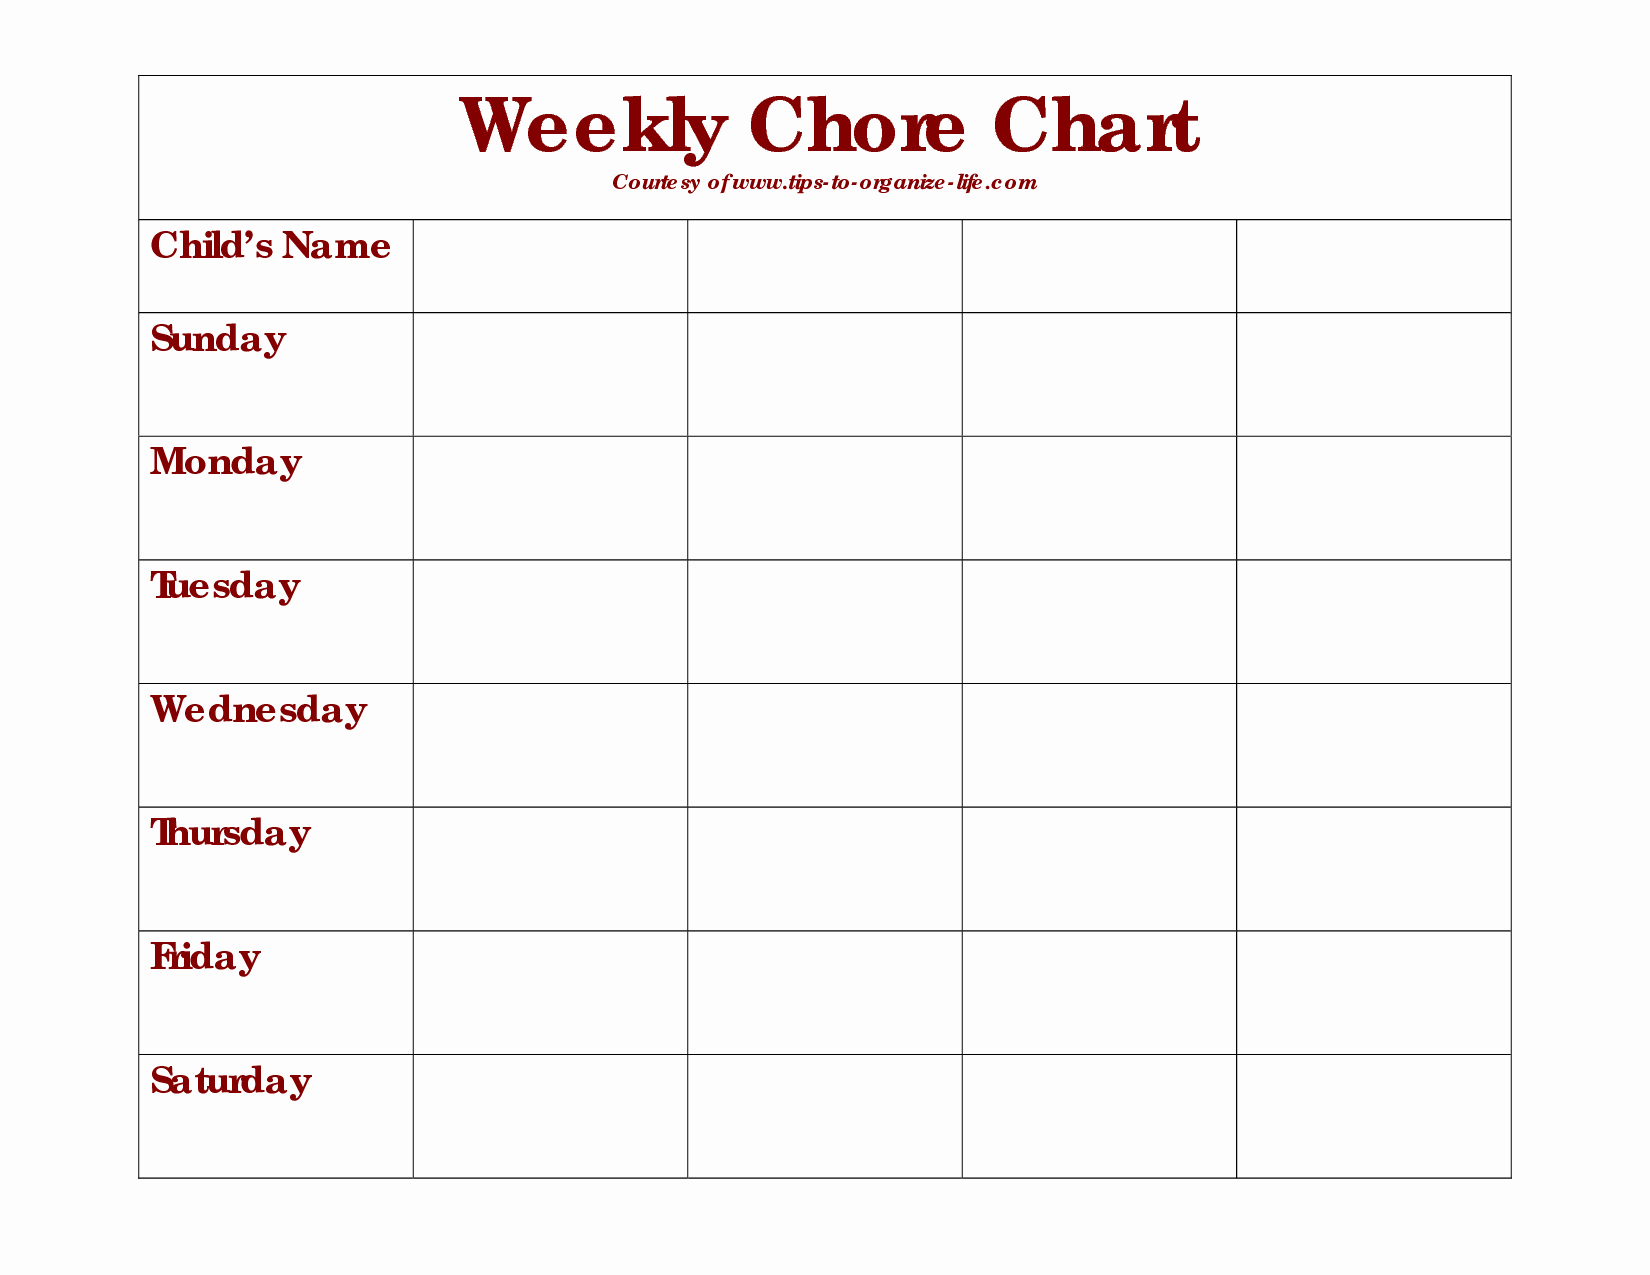 Daily Chore Chart Template Awesome 9 Best Of Monthly Chore Chart Printable Templates